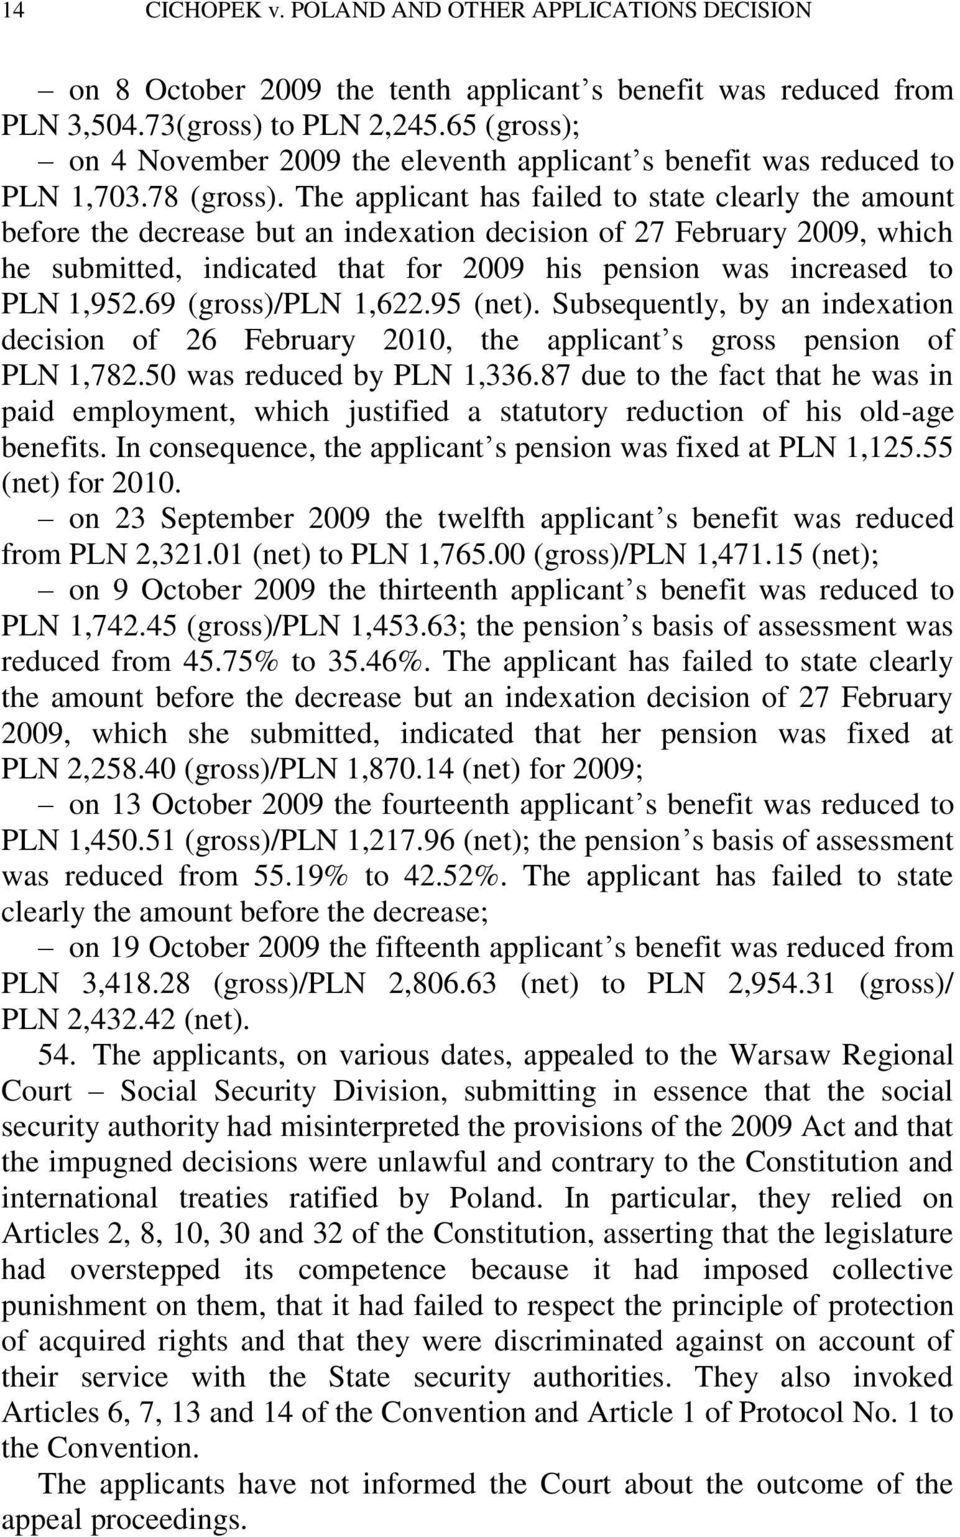 The applicant has failed to state clearly the amount before the decrease but an indexation decision of 27 February 2009, which he submitted, indicated that for 2009 his pension was increased to PLN